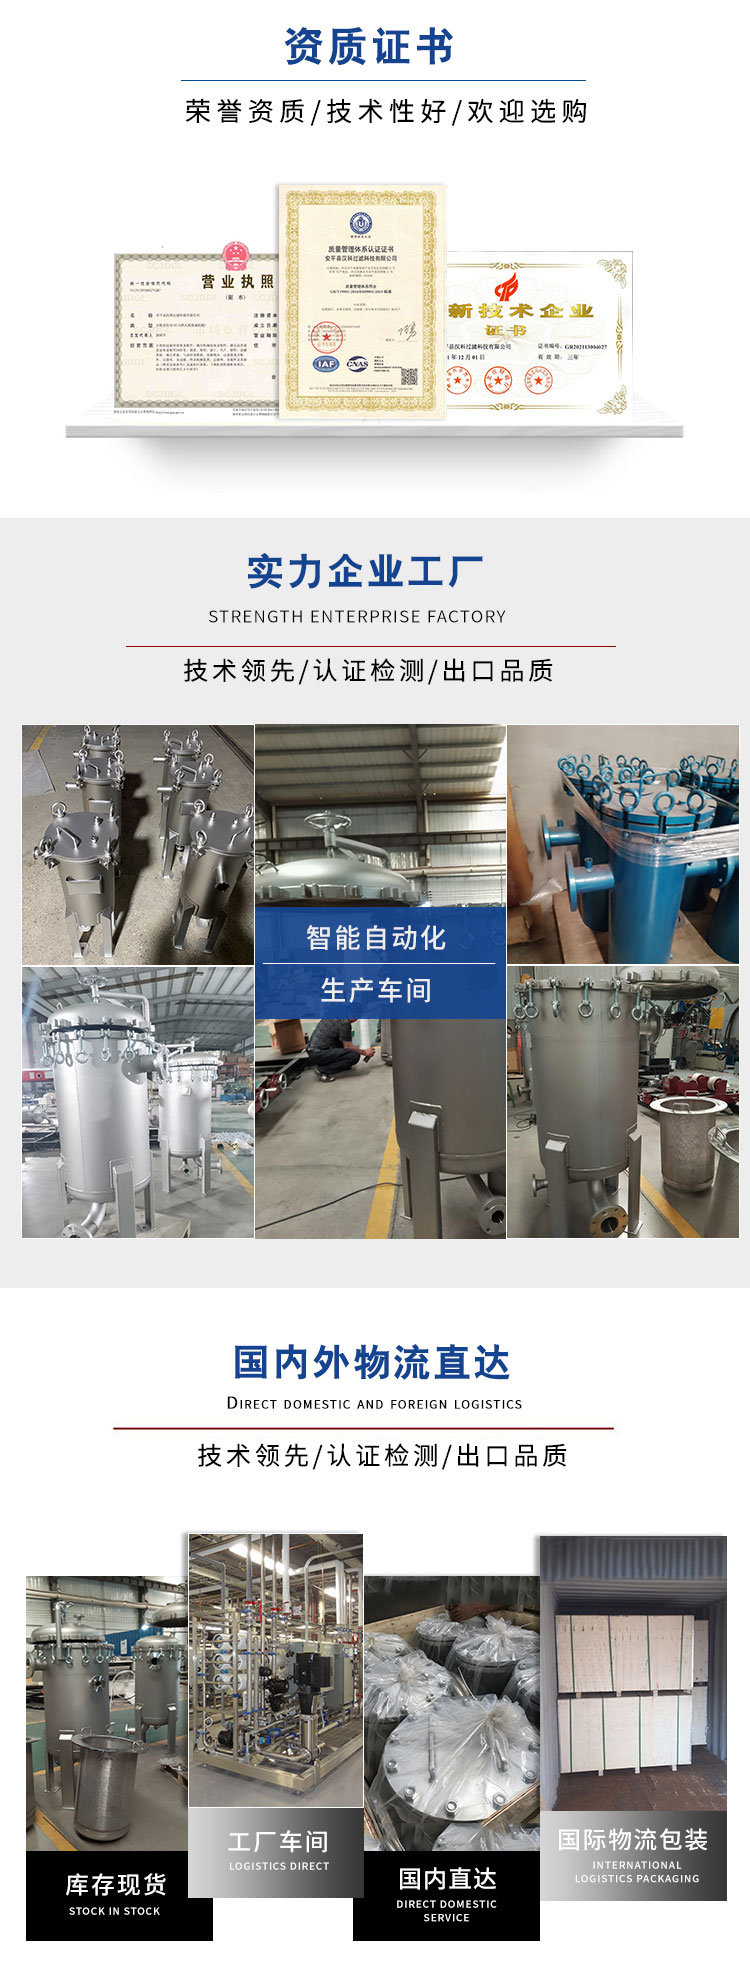 Stainless steel bag filter with Hanko polyester sealing filter bag has good filtration effect